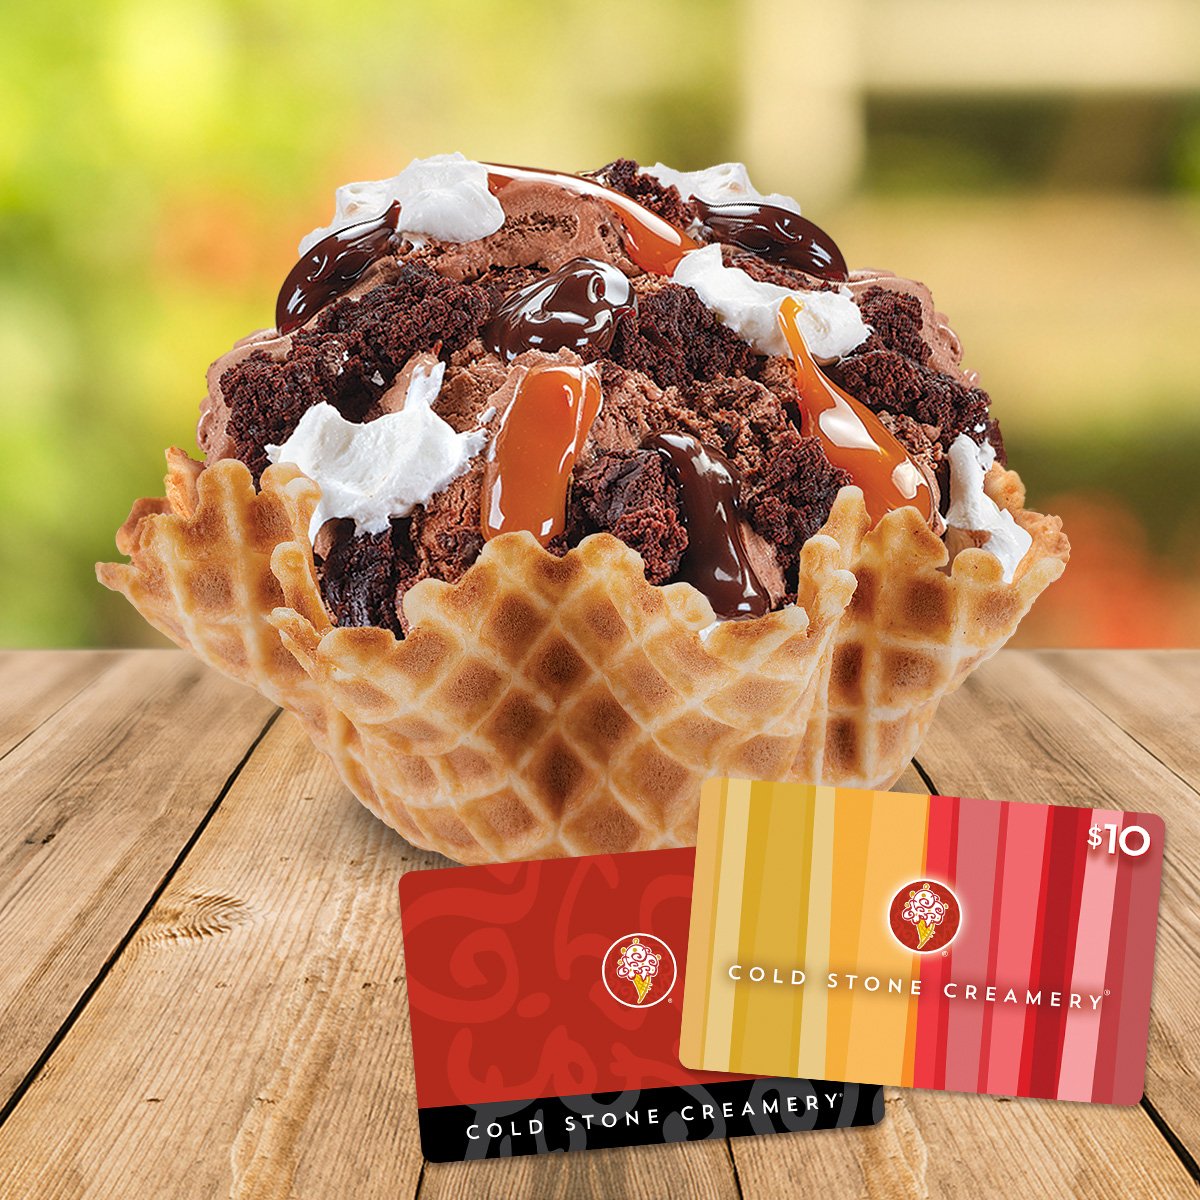 Cold Stone Creamery on Twitter "Happy National Ice Cream Day! We are